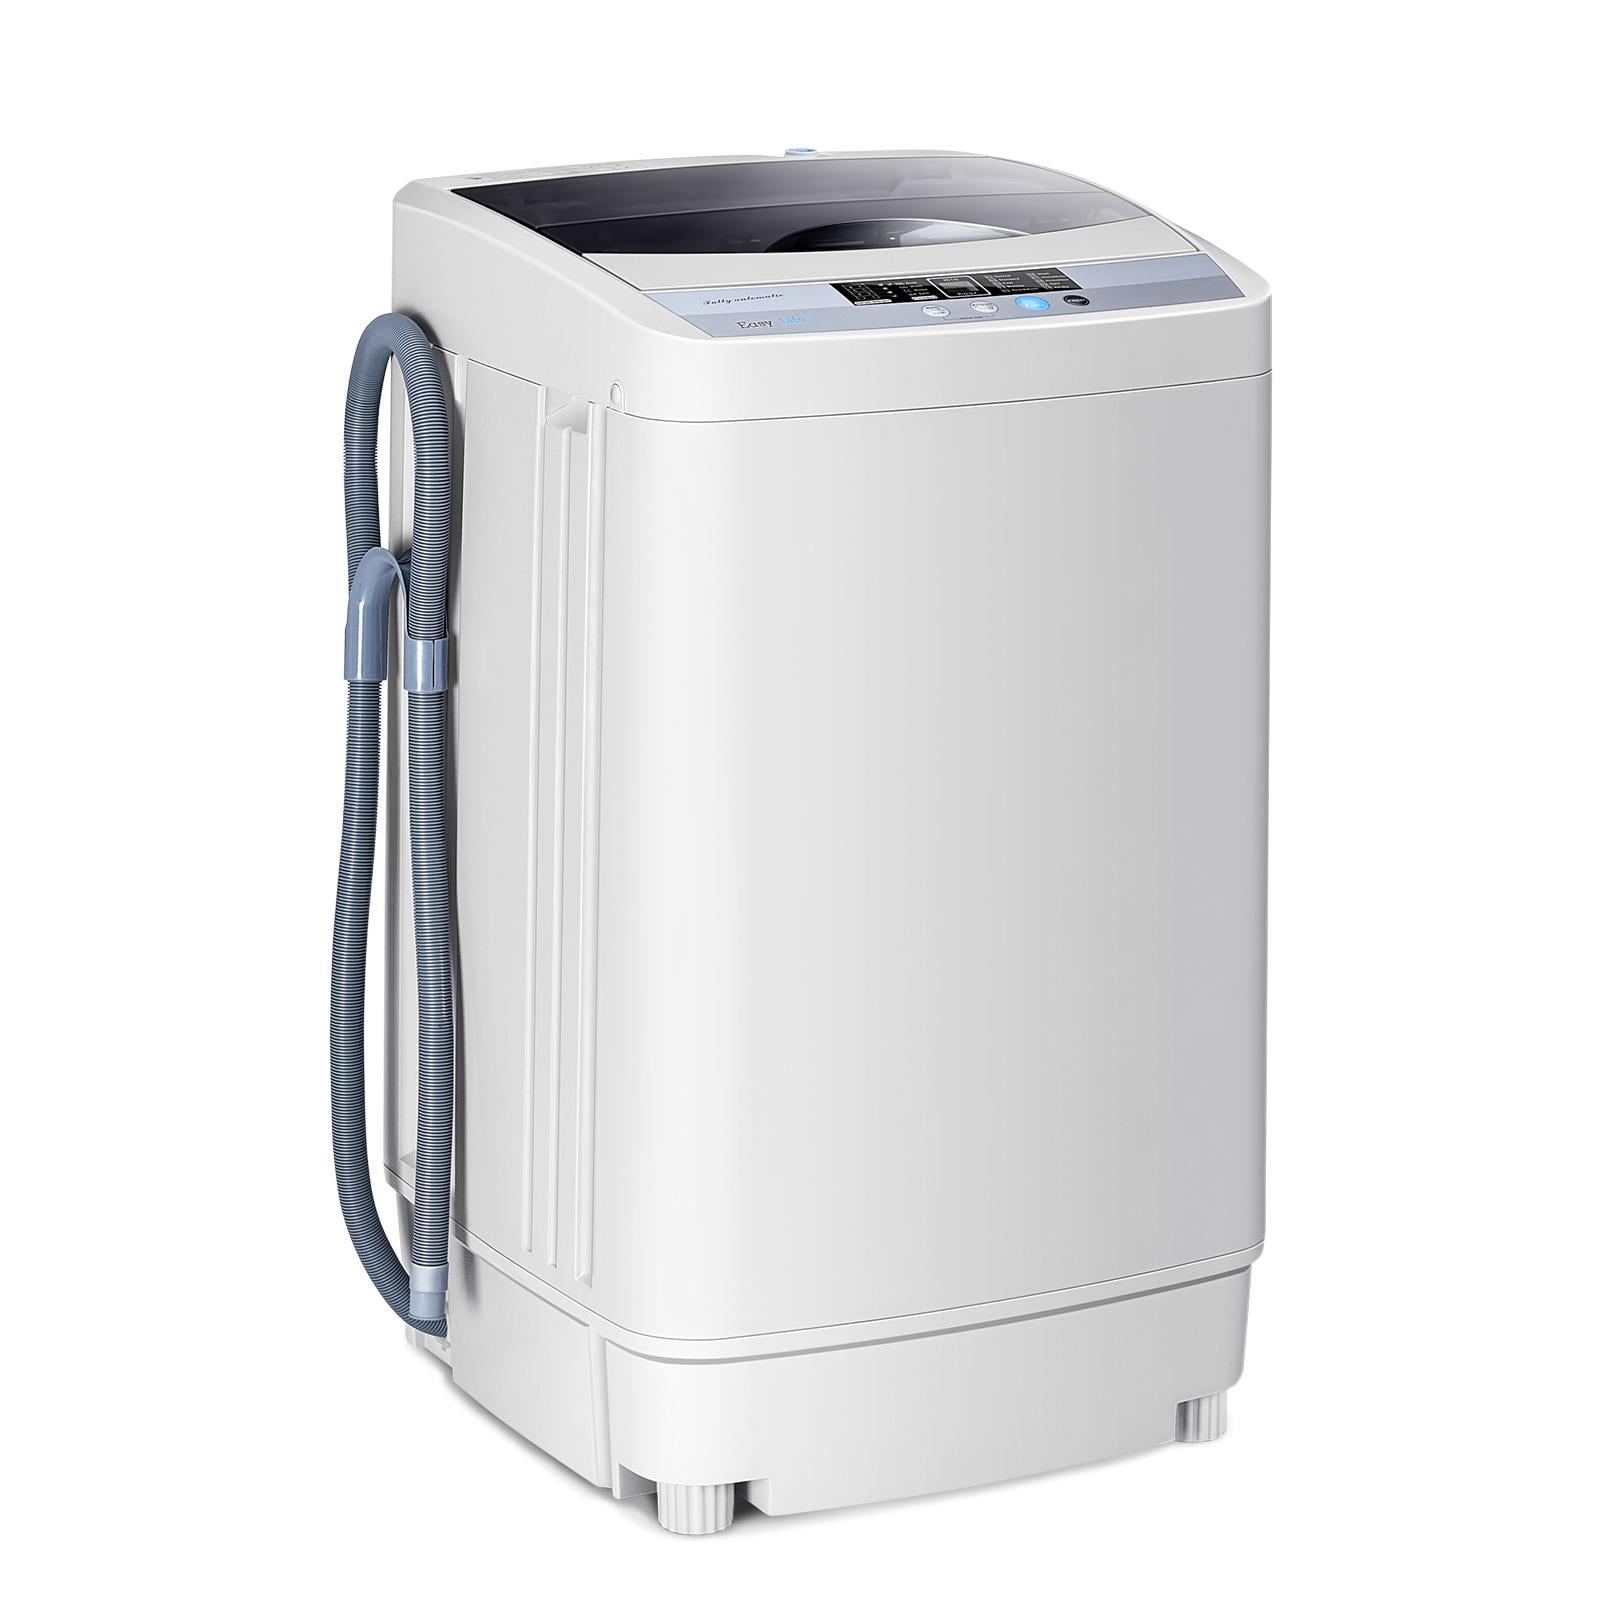 Giantex Portable Compact Washing Machine - EP24170-DT for sale